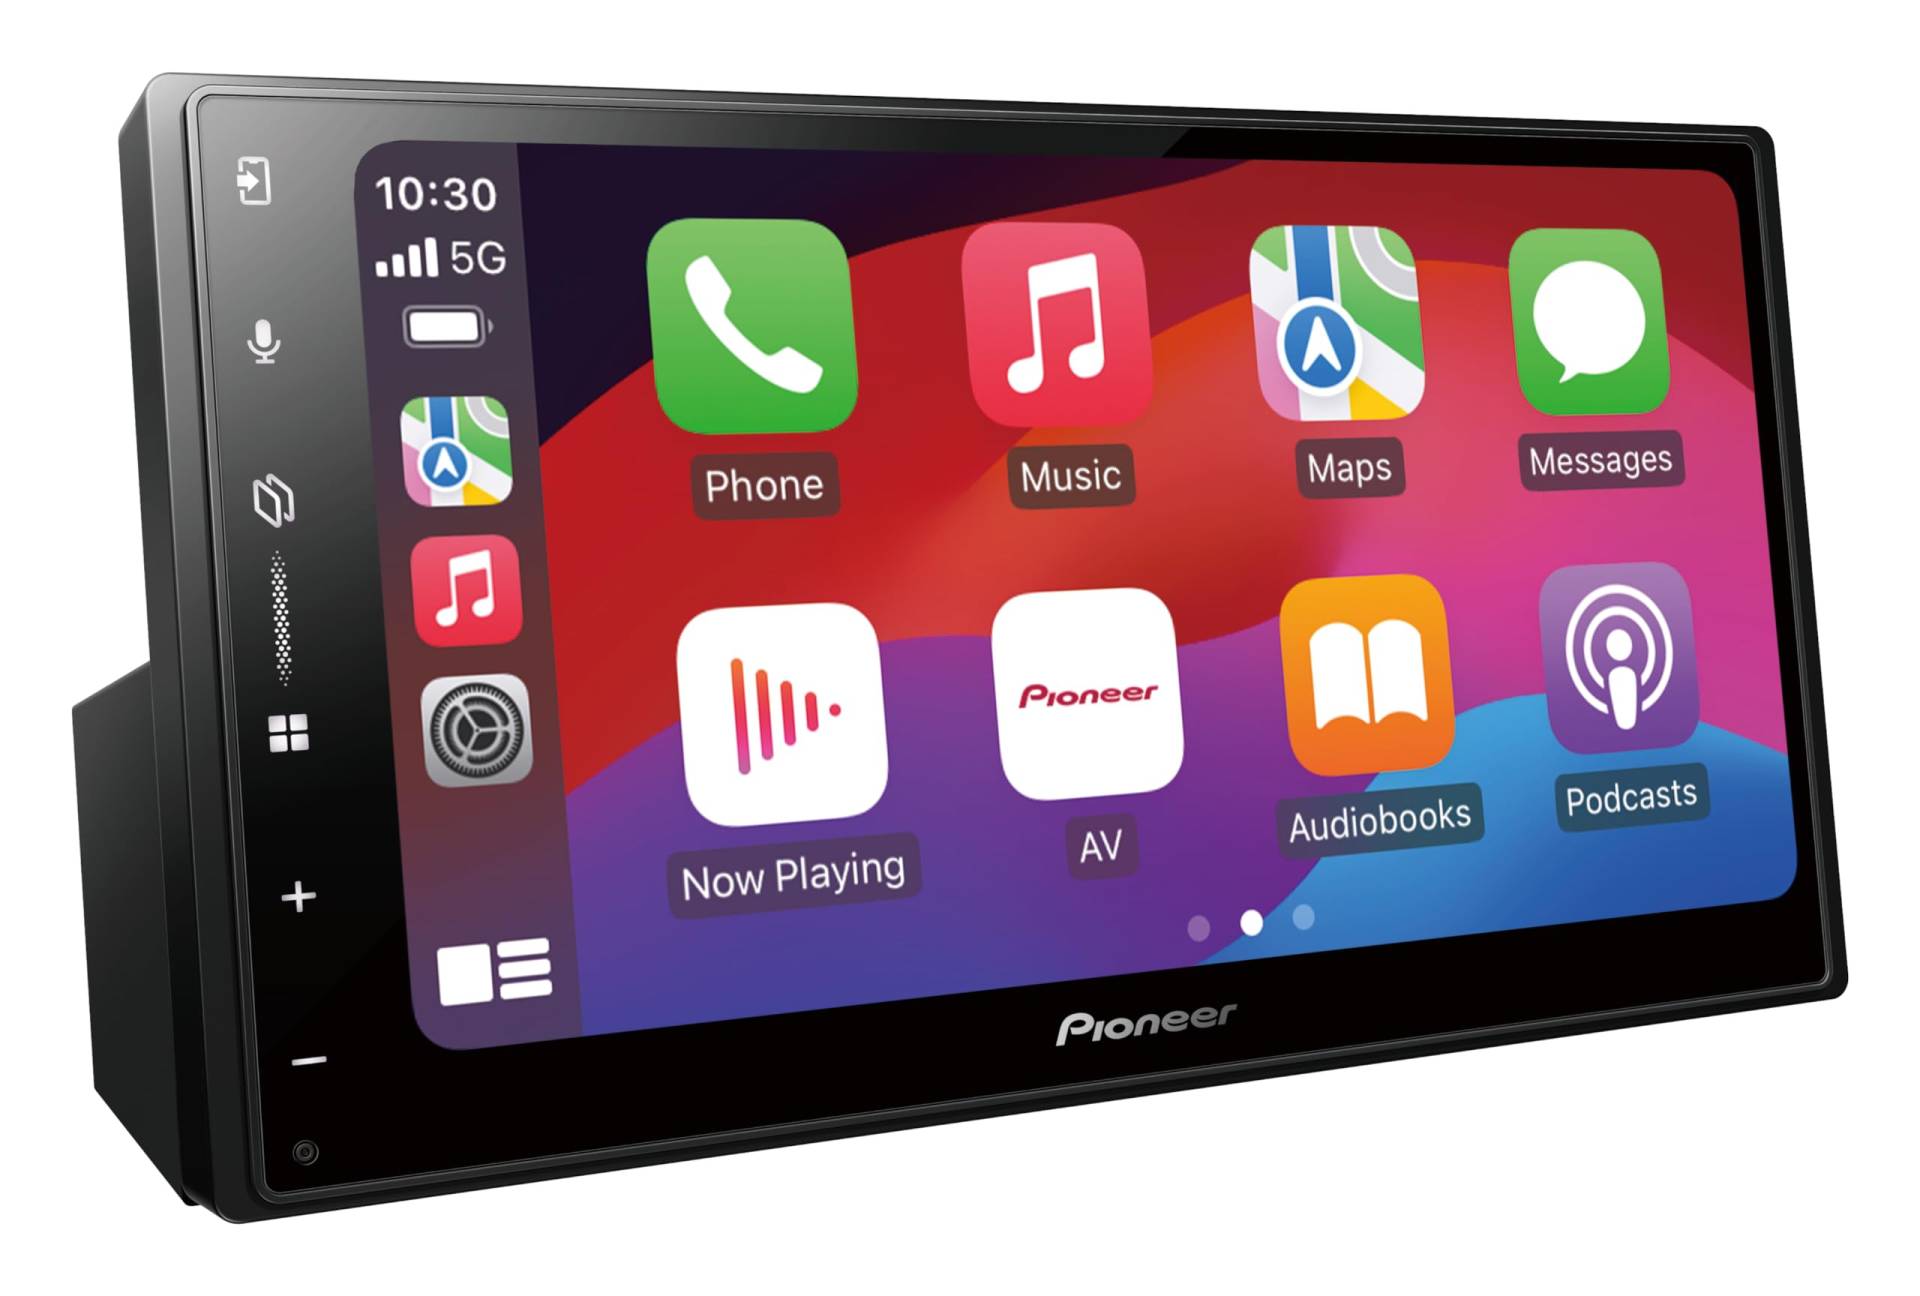 Pioneer SPH-DA77DAB-AN 2DIN Mediacenter, kapazitives 6,8" Touchpanel, mit Wi-Fi, Bluetooth, Apple CarPlay, Android Auto und DAB+, 13-Band-Grafikequalizer, inkl. DAB-Antenne von Pioneer